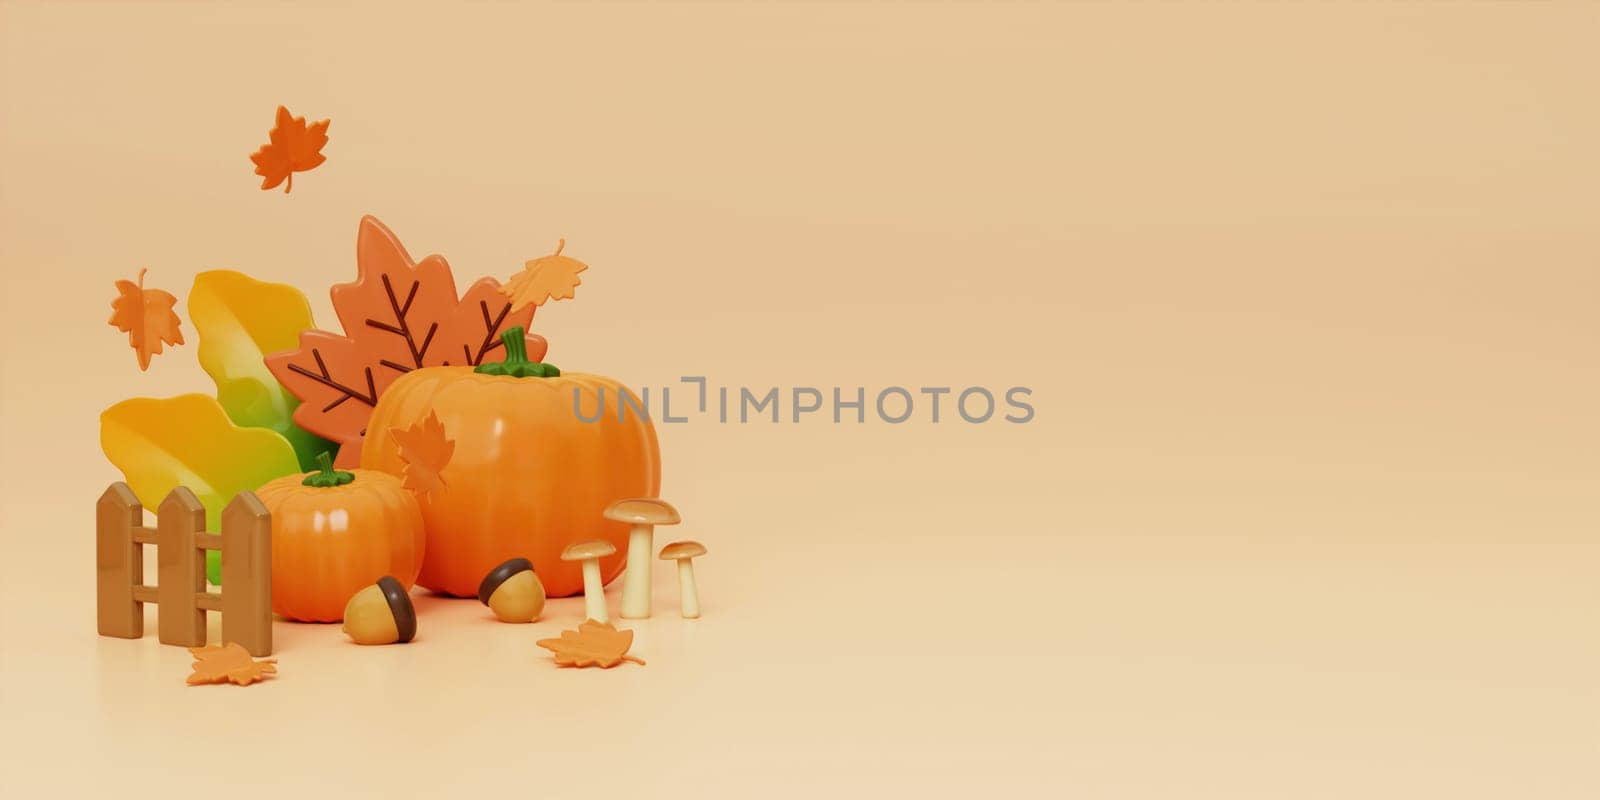 Autumn Display Background with Autumn leaves and product display. 3d render illustration..